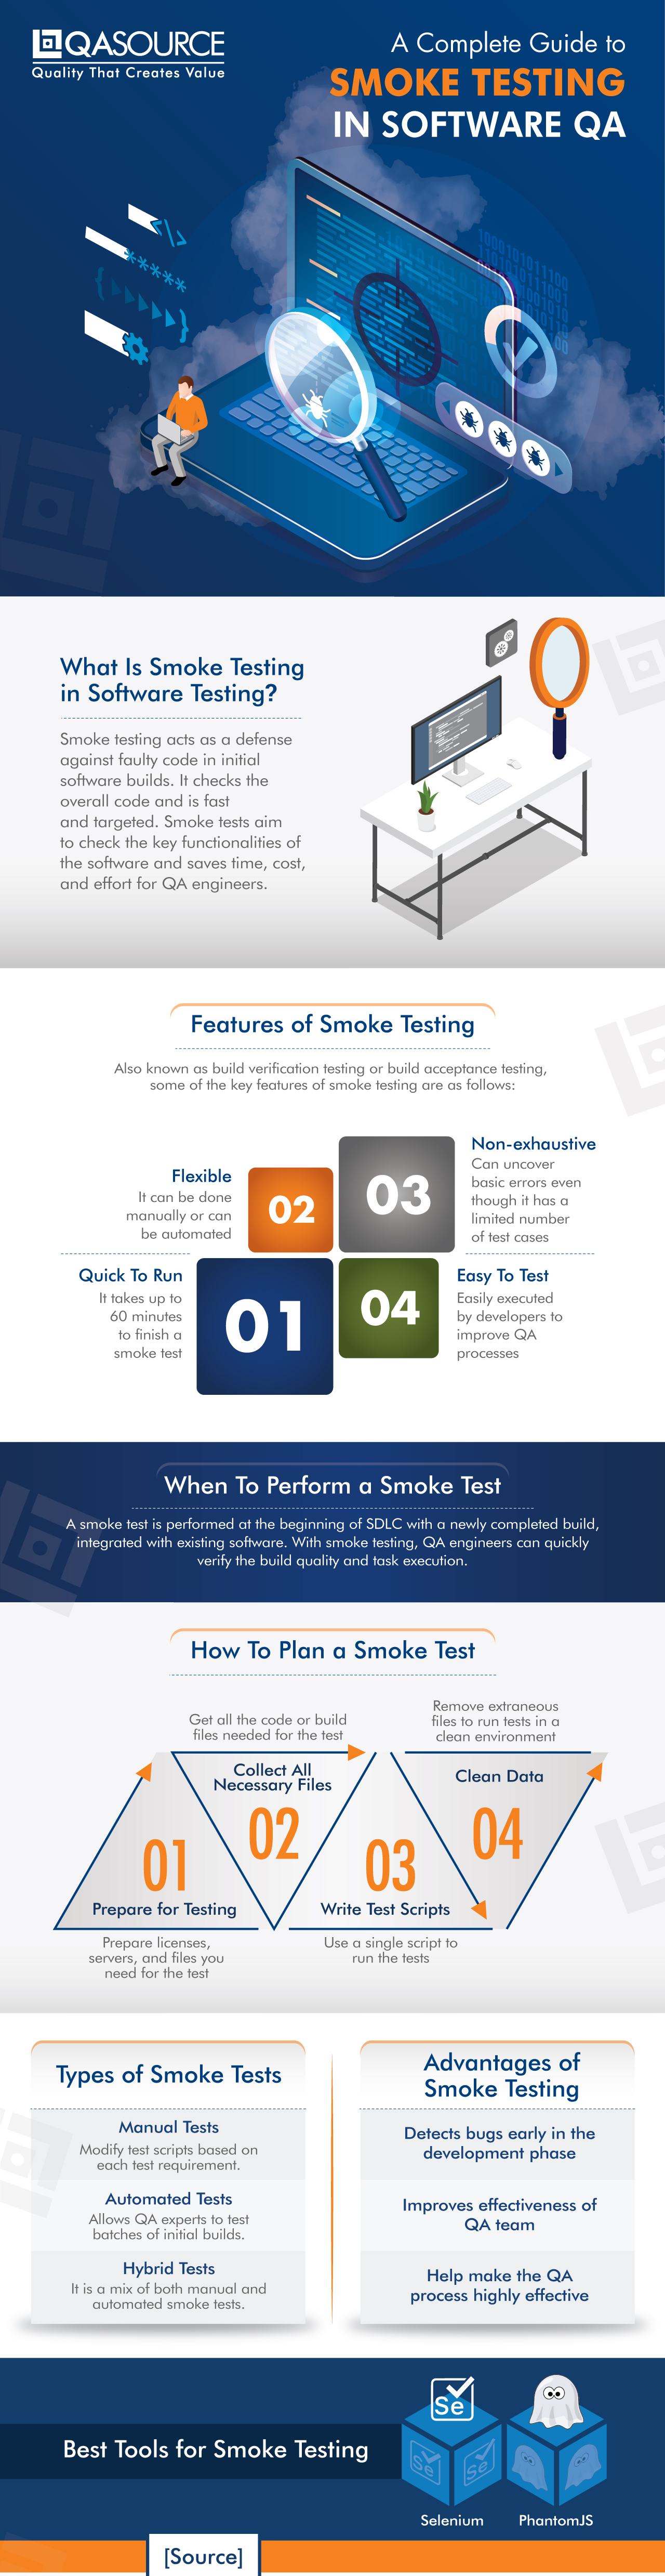 A Complete Guide to Smoke Testing in Software QA